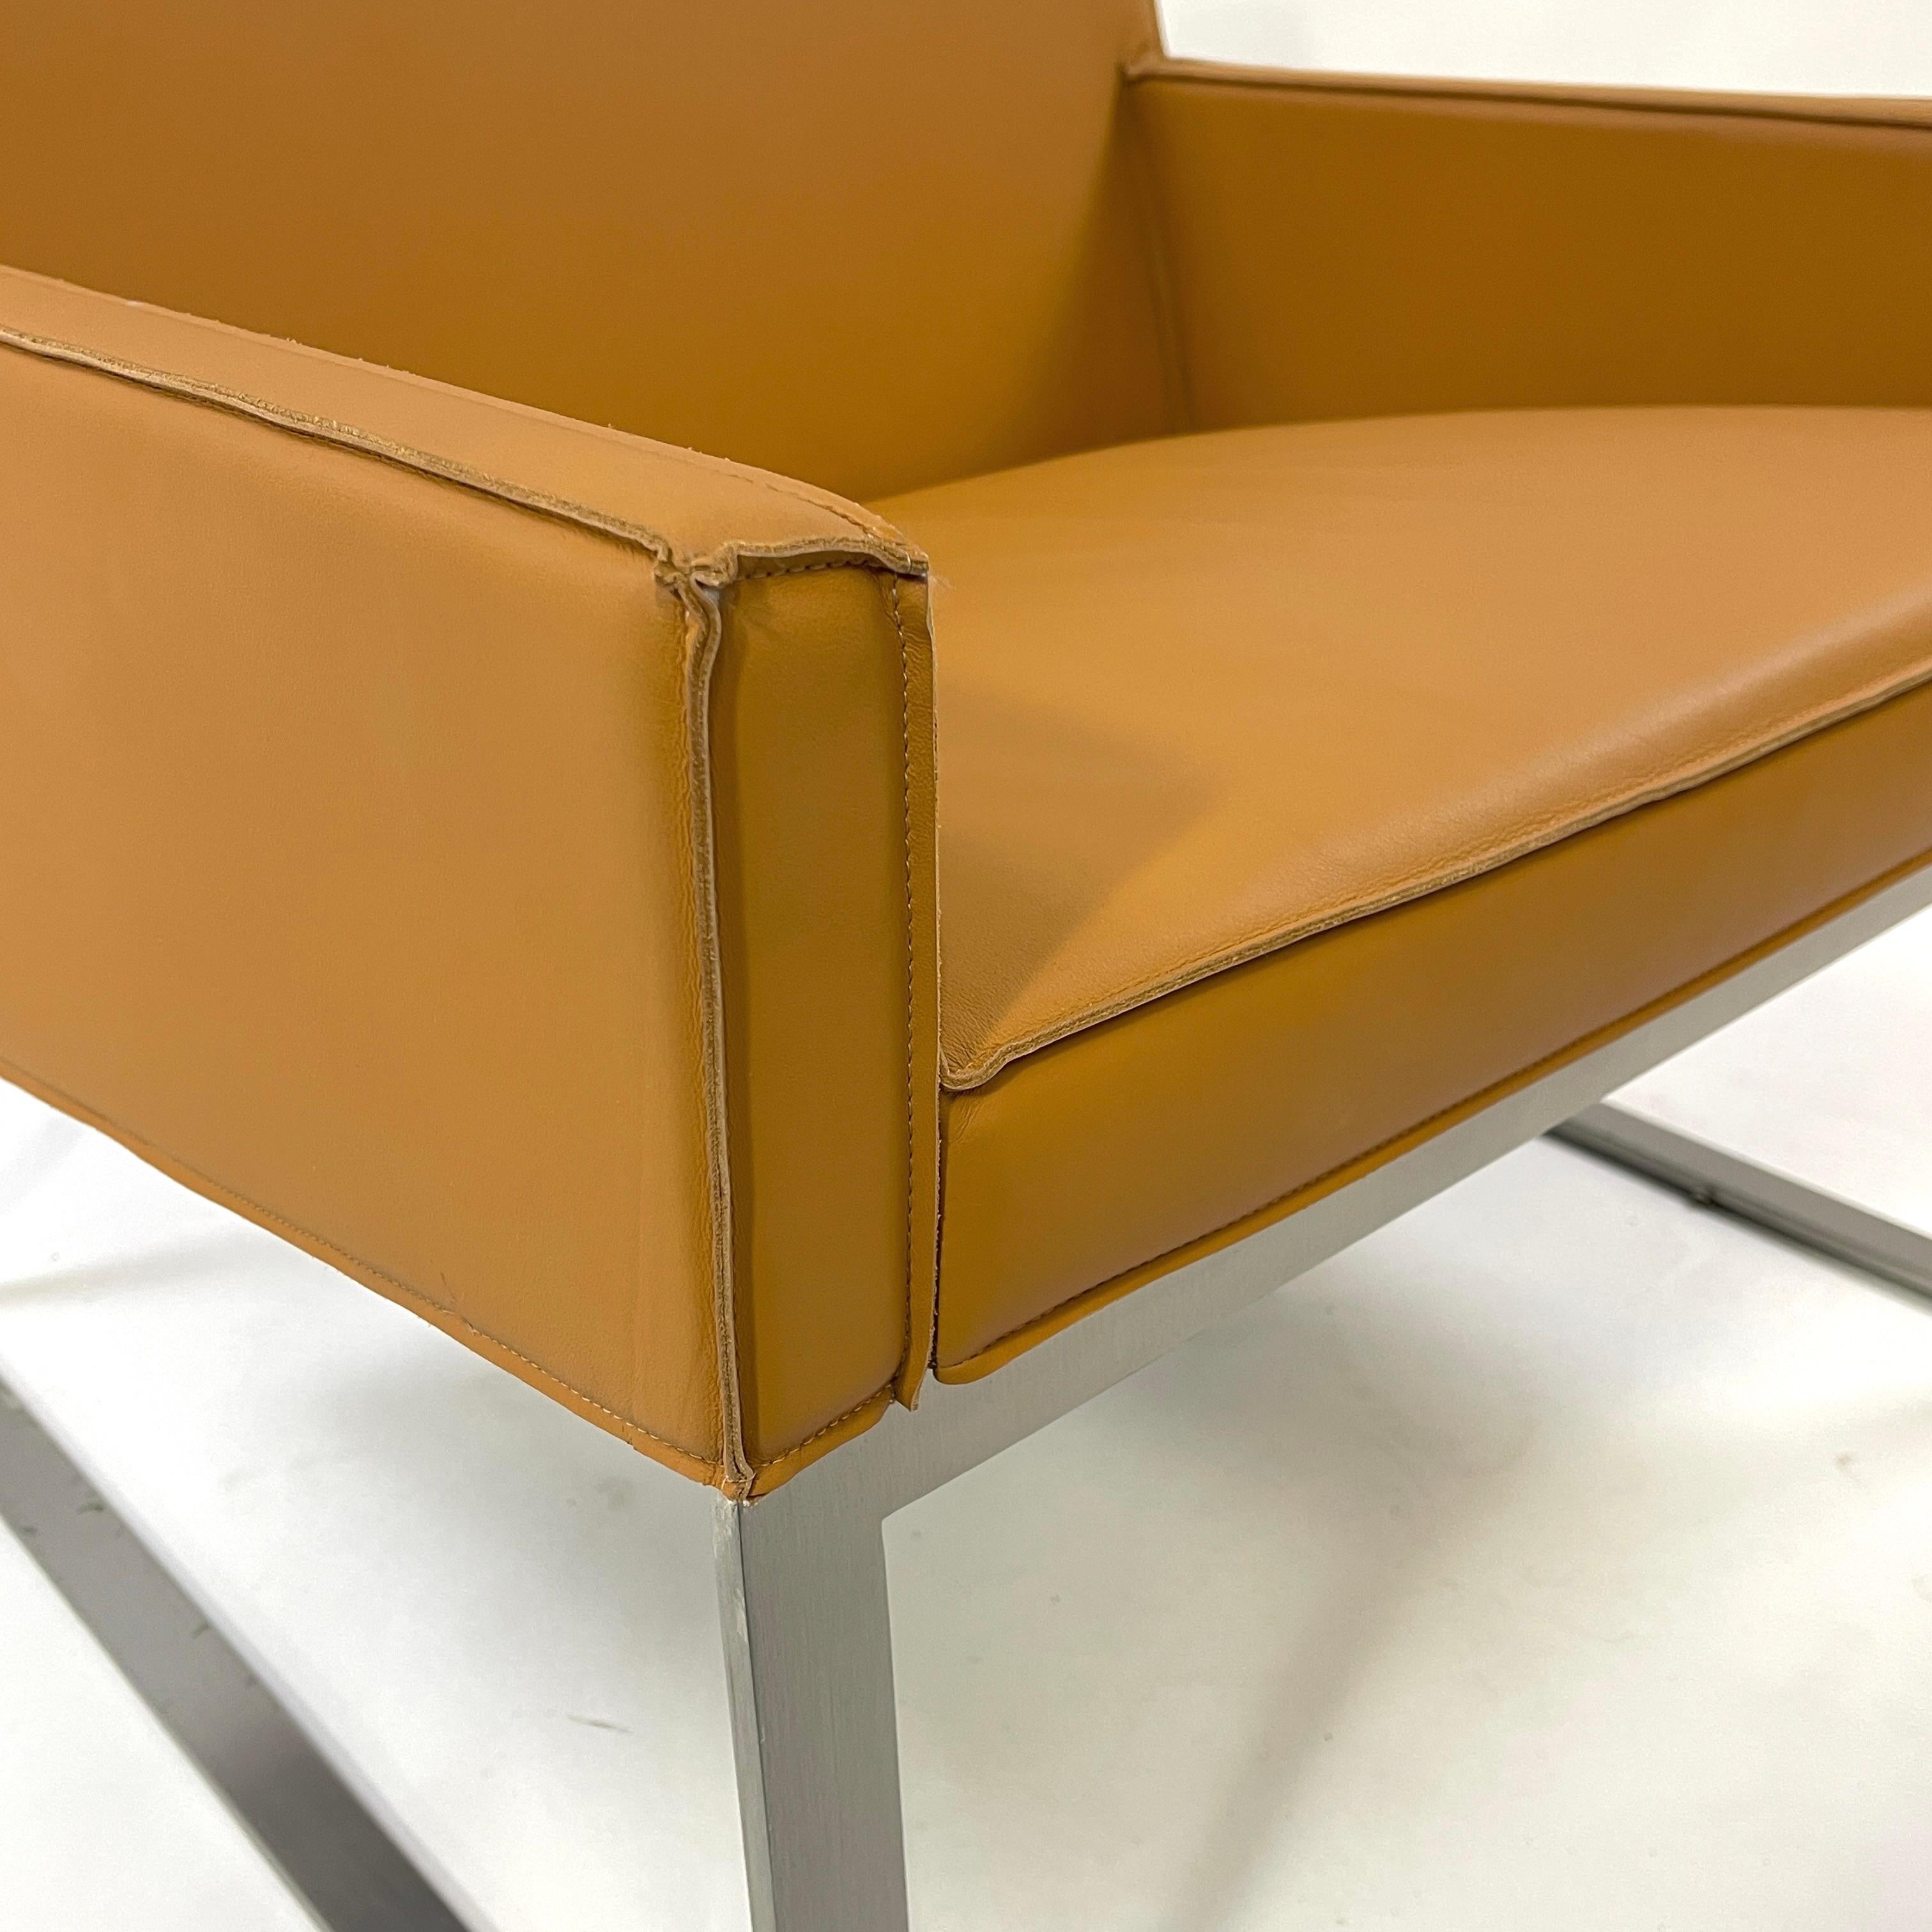 Simply stunning 'B3' Lounge Chair designed by Fabien Baron for Bernhardt. Bernhardt has upped it game with this stunning design. These chairs were custom made with a butter soft tanned leather that has subtle visible stitching at the arms and edges.